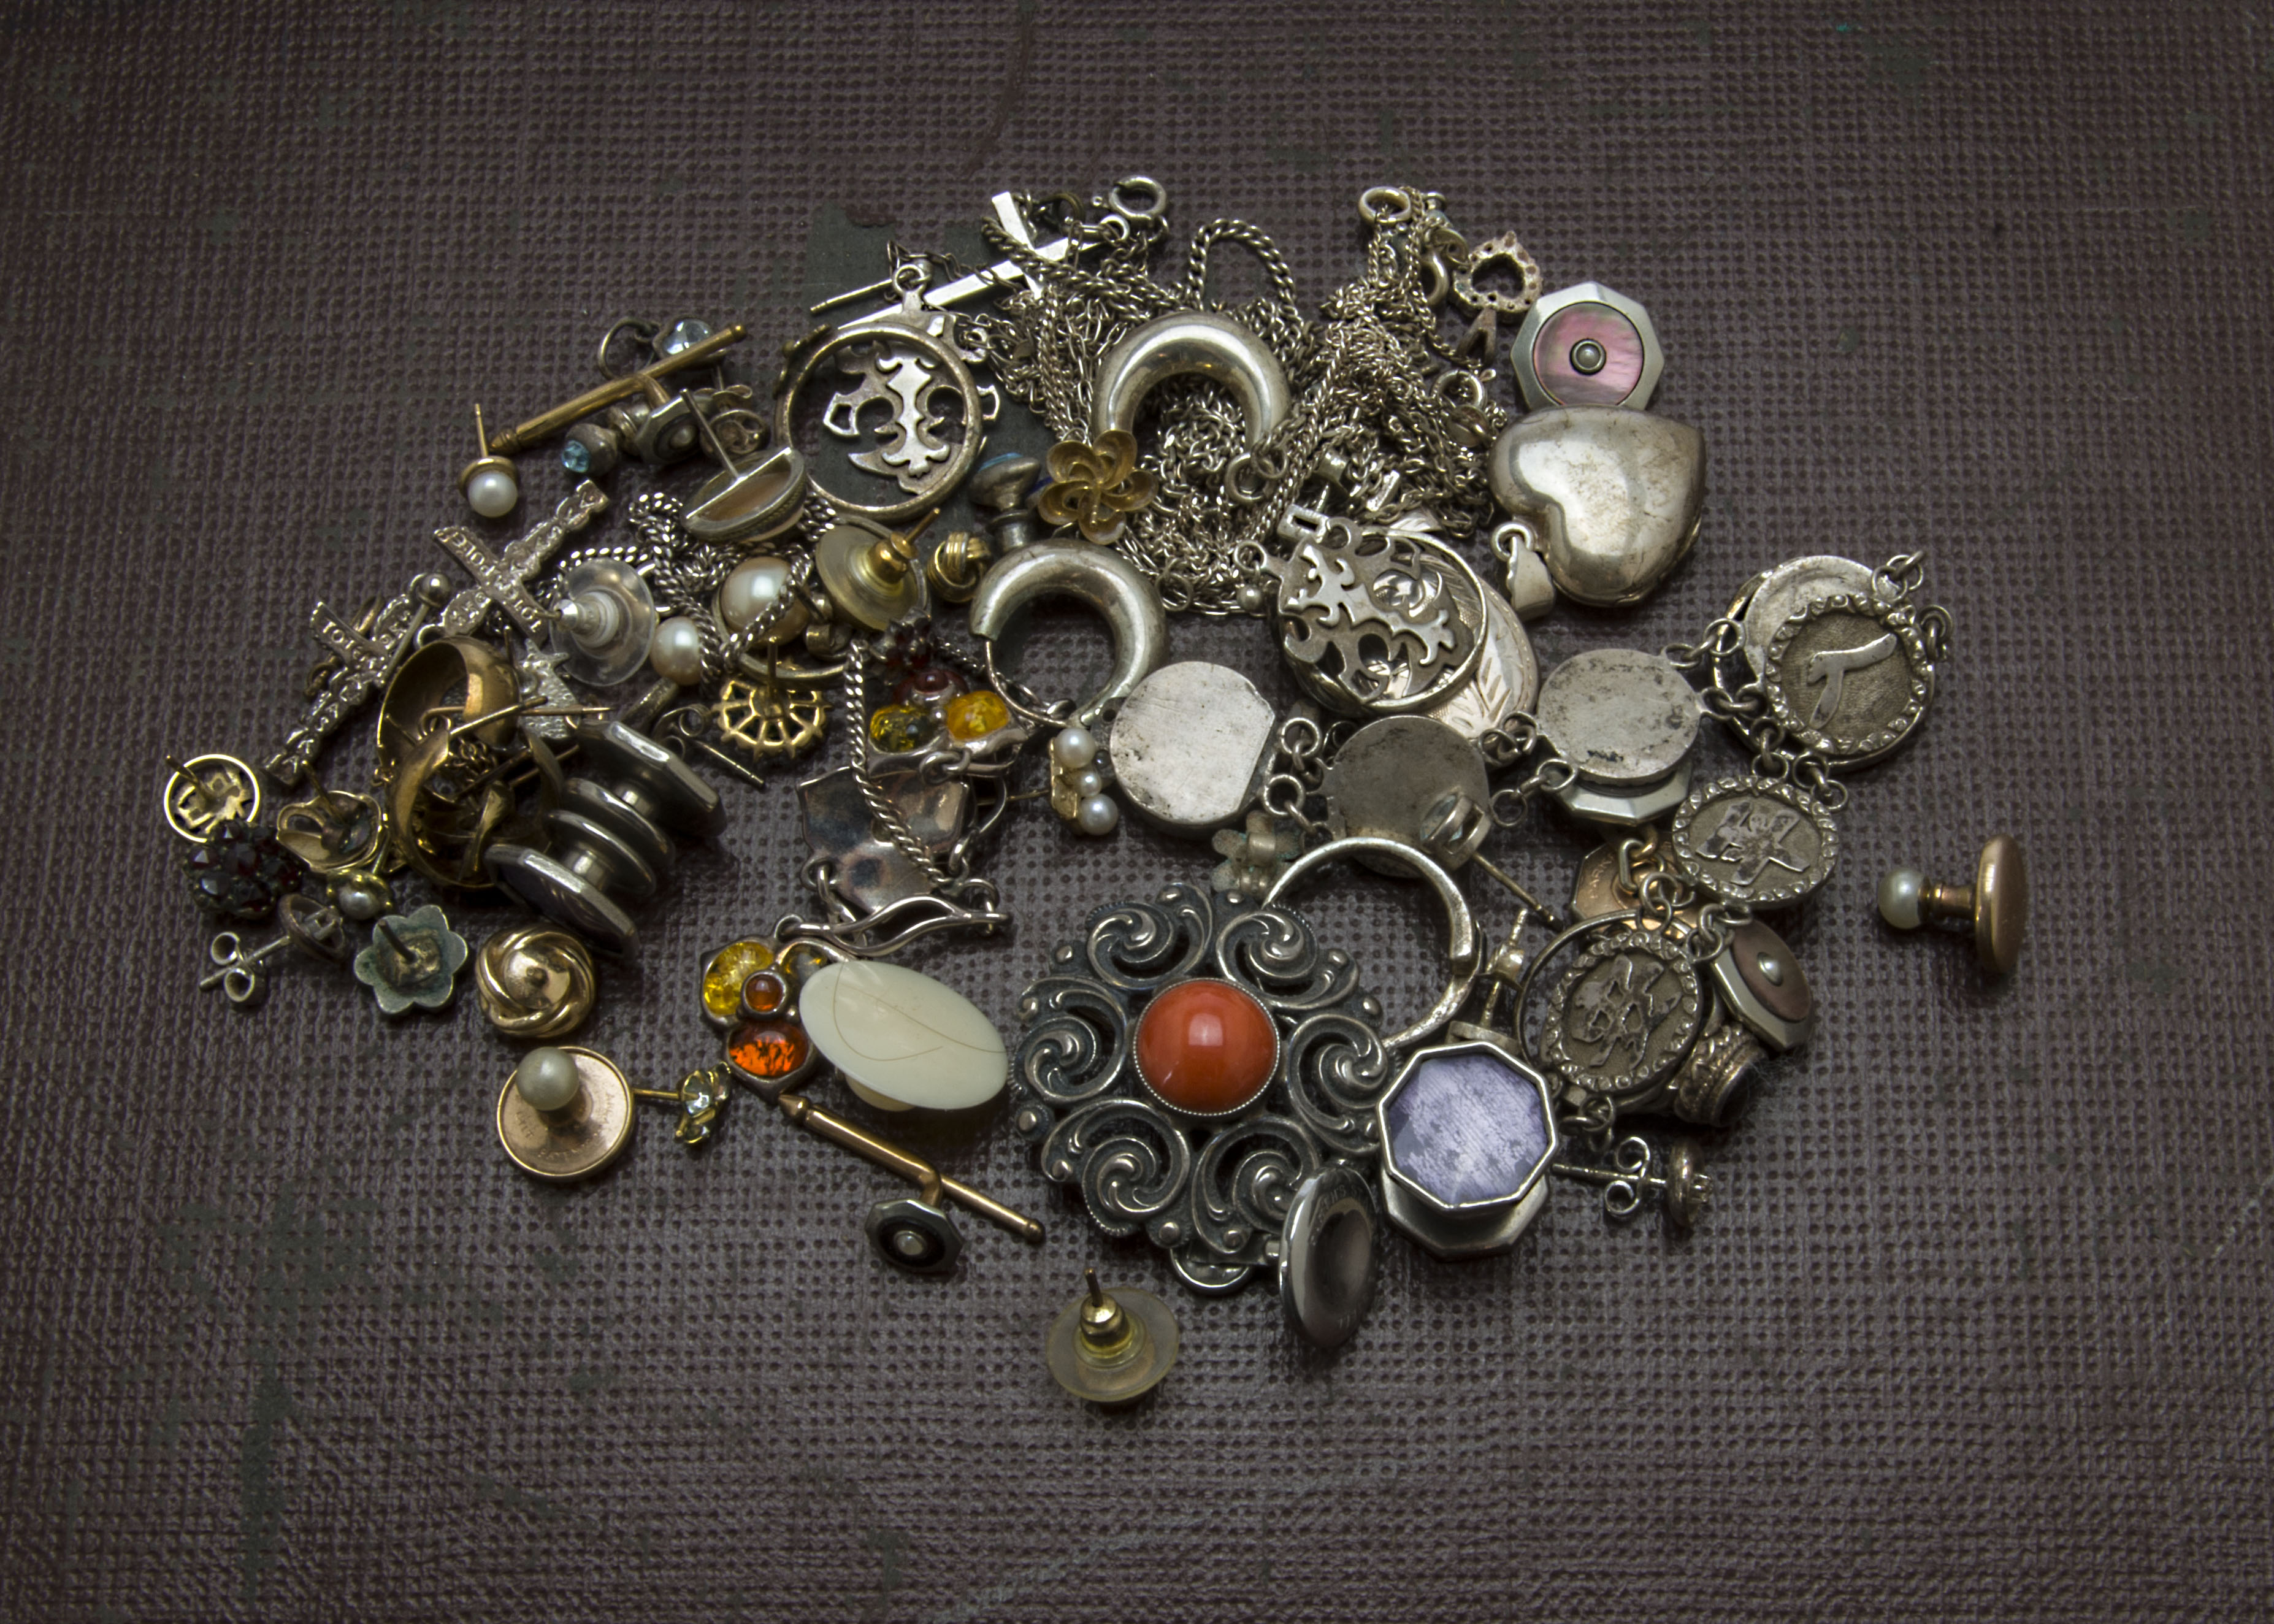 A collection of jewellery and jewellery boxes, including silver jewellery such as a brooch with - Image 2 of 4